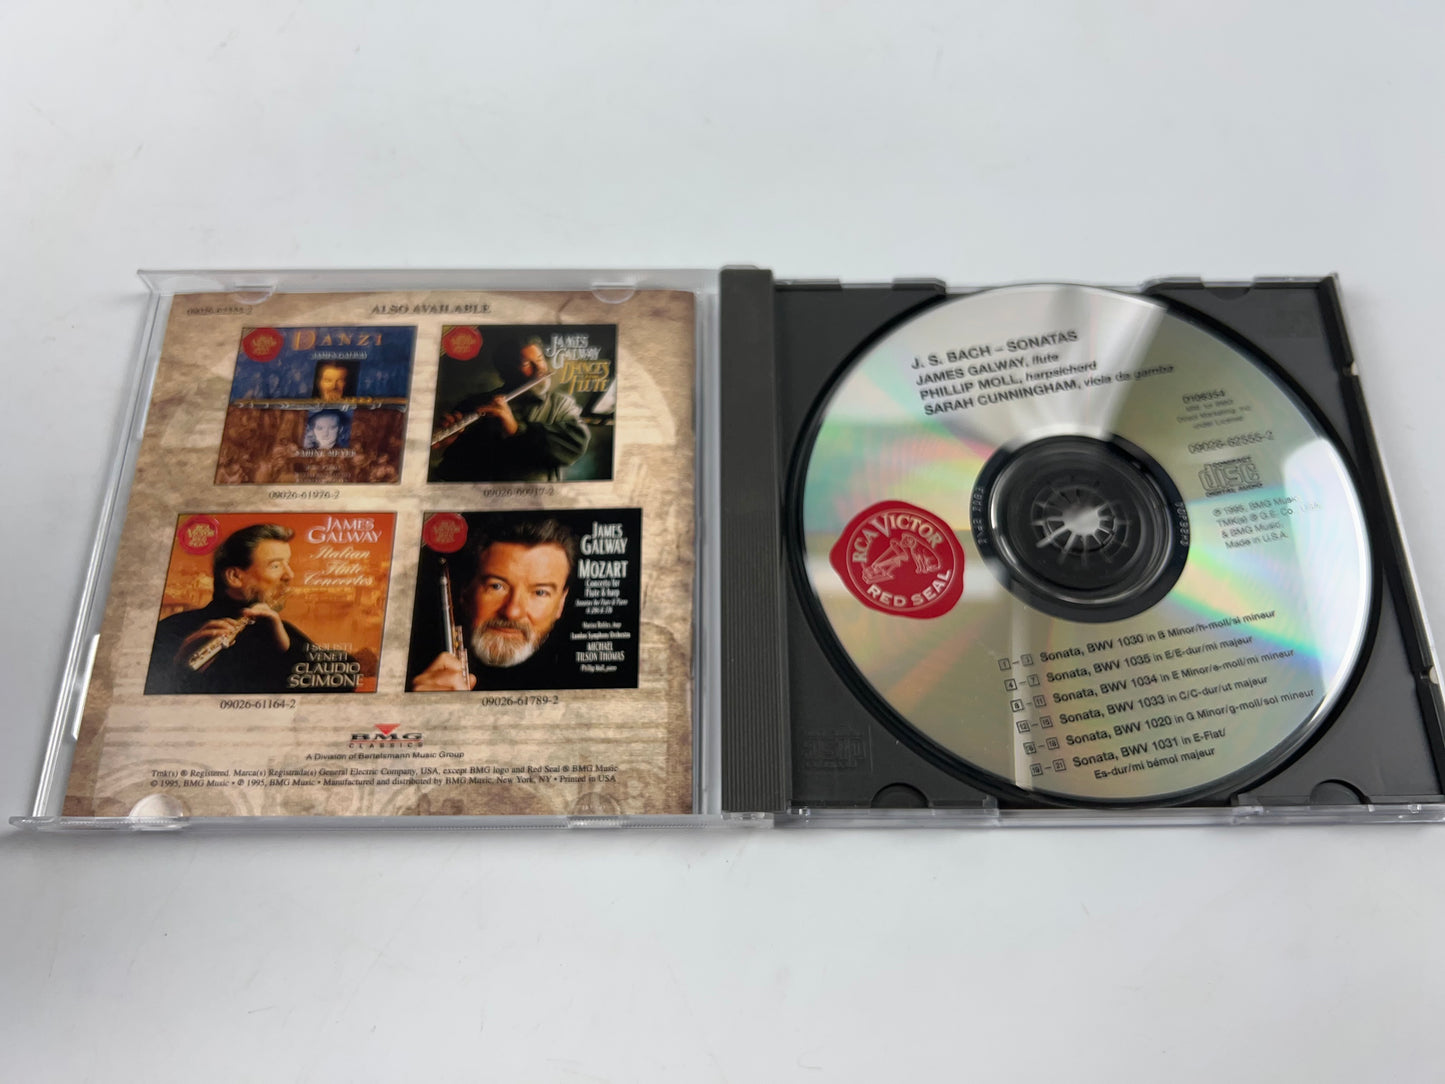 Bach Sonatas by James Galway, Phillip Moll, and Sarah Cunningham (CD, 1995)